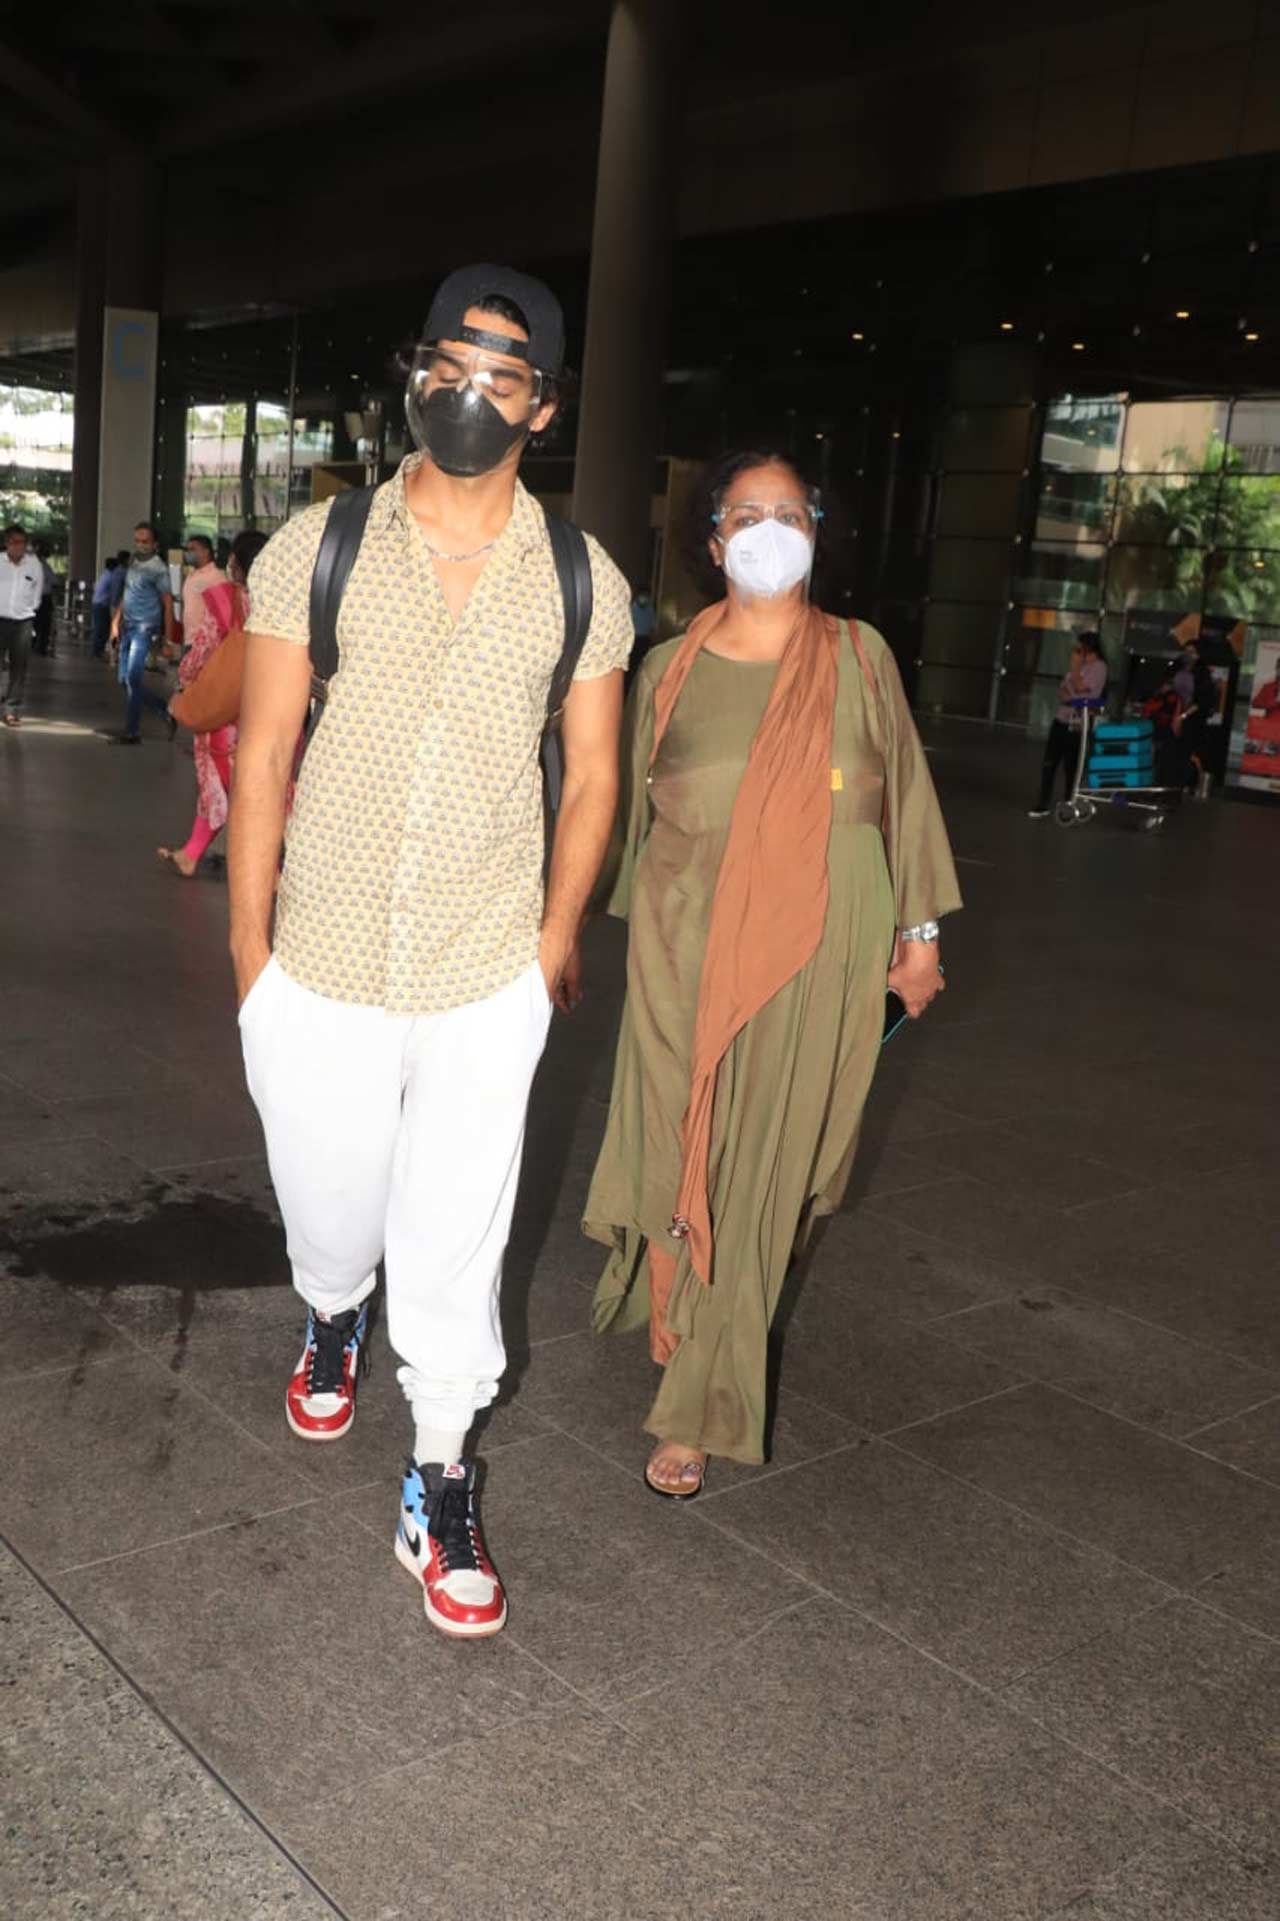 Ishaan Khatter was clicked with mother Neelima Azeem at the Mumbai airport. On the professional front, Ishaan has Bhoot Police as his upcoming film along with Katrina Kaif and Siddhant Chaturvedi.